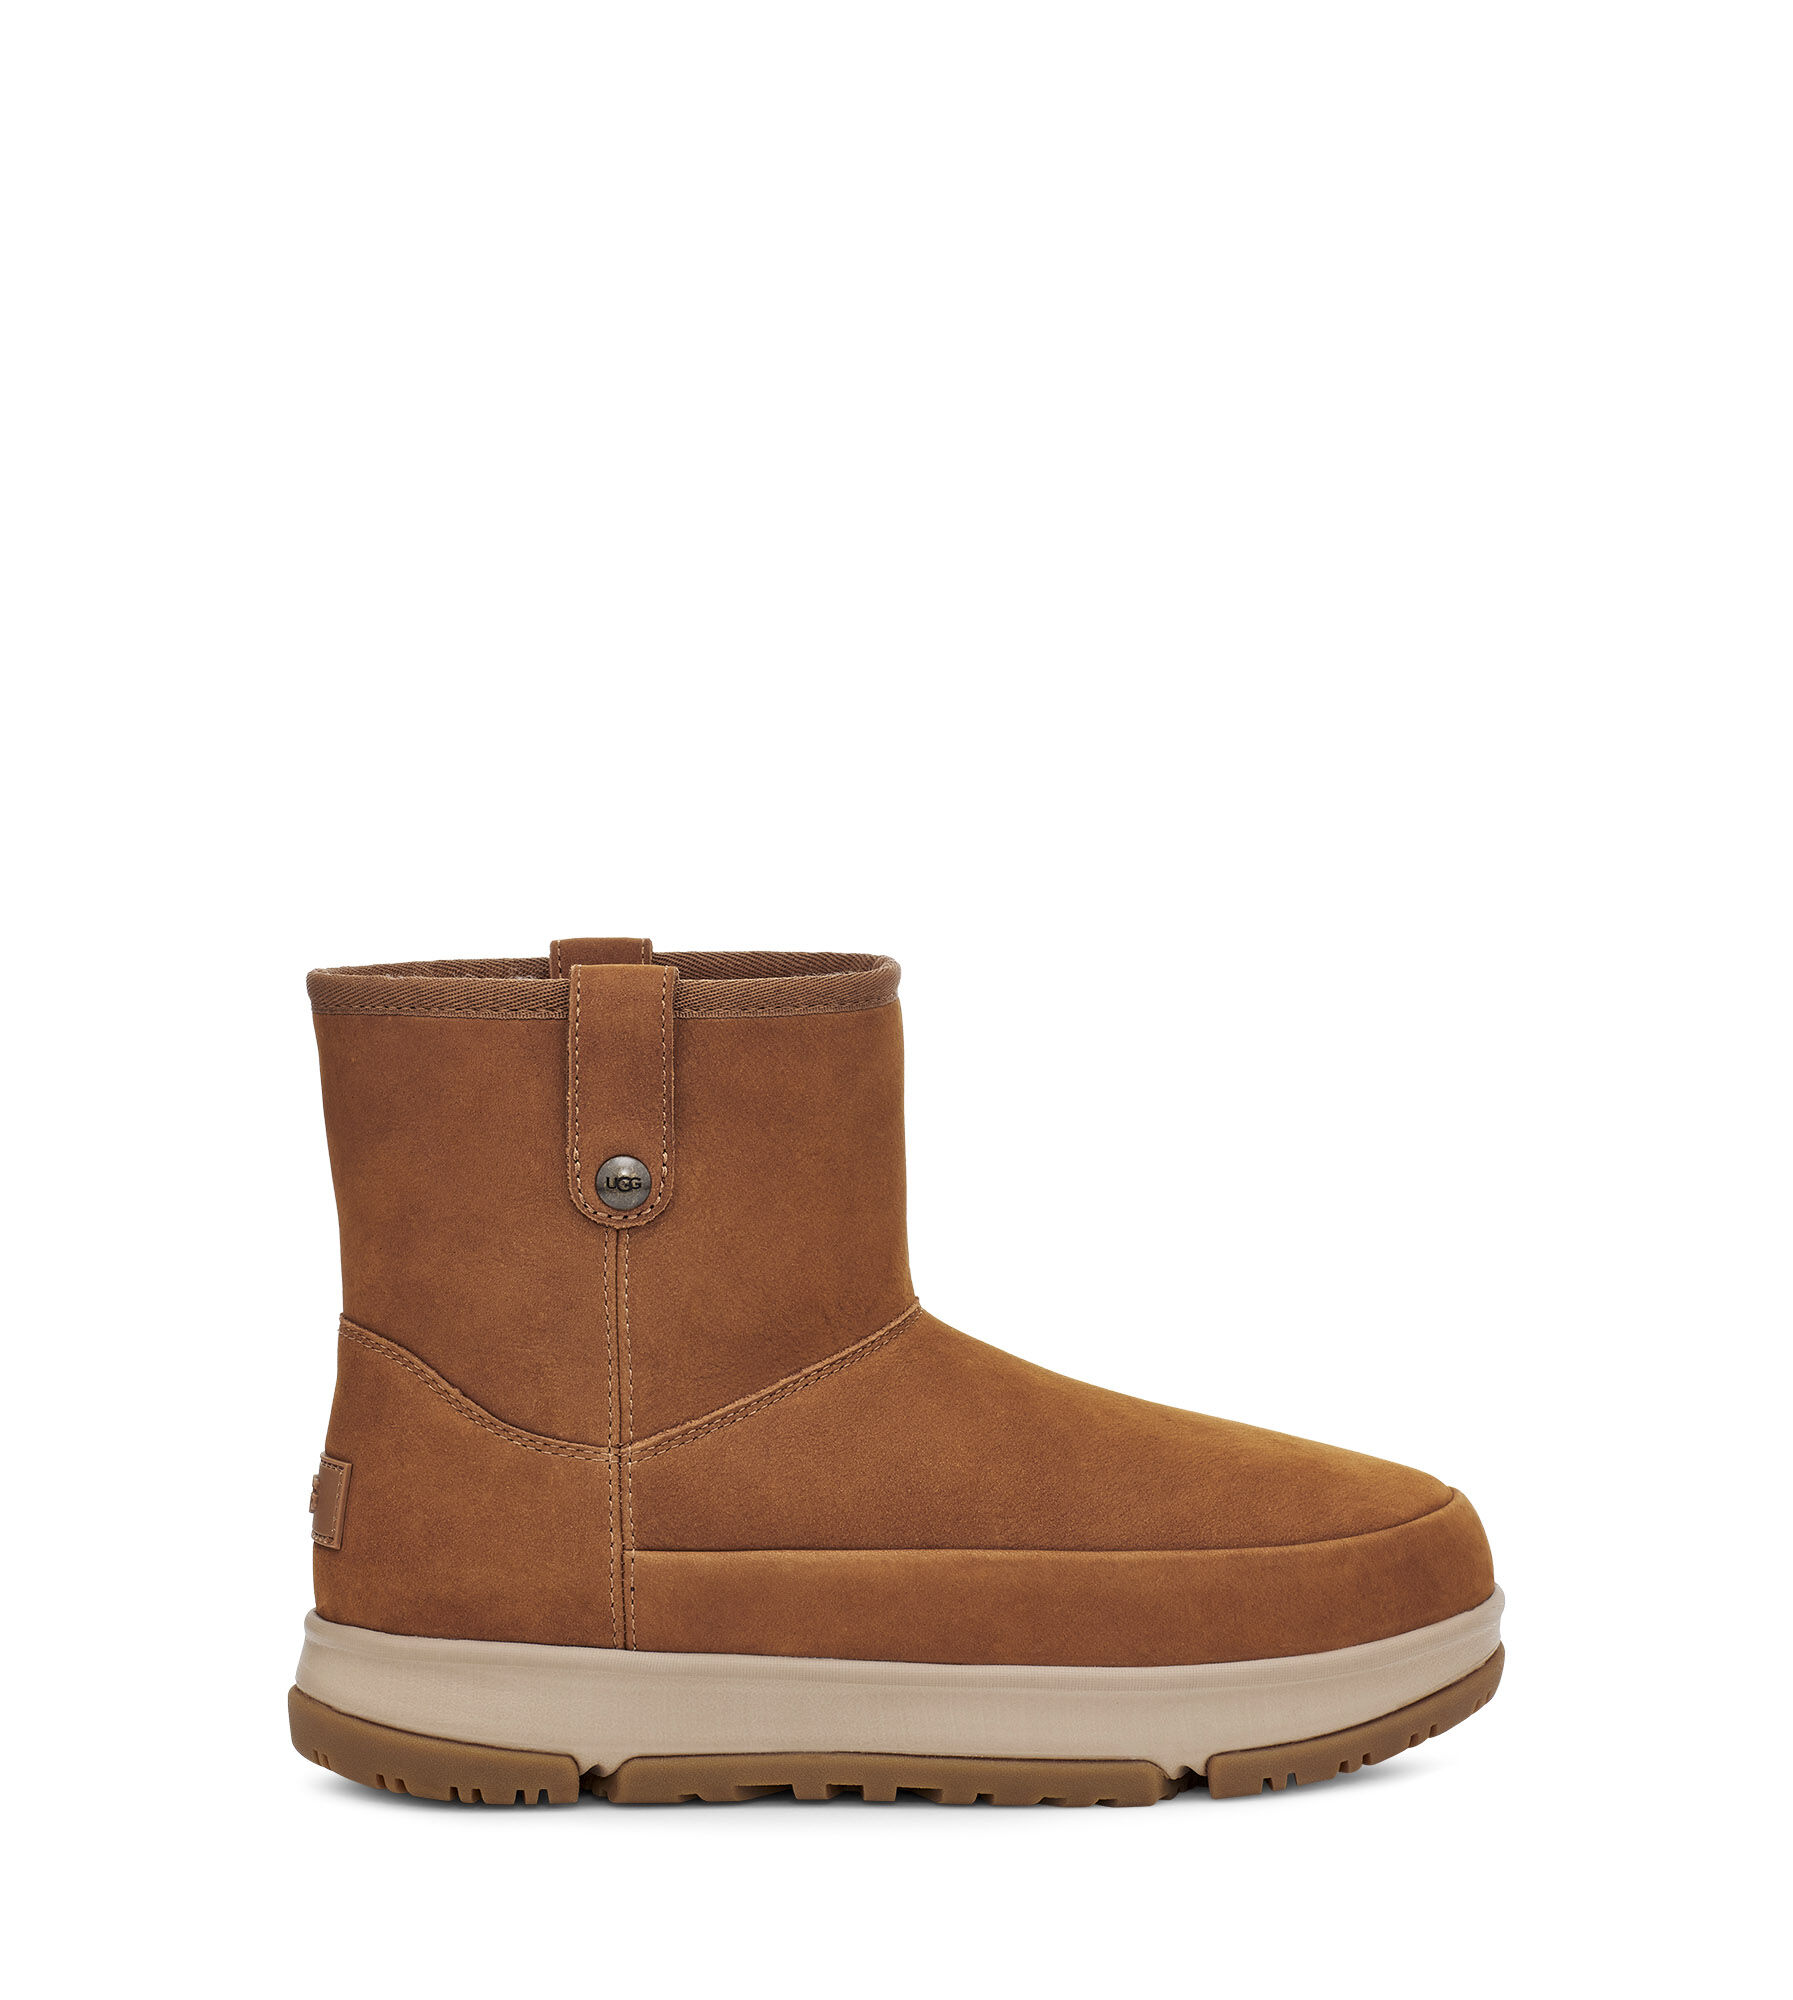 womens leather ugg boots sale